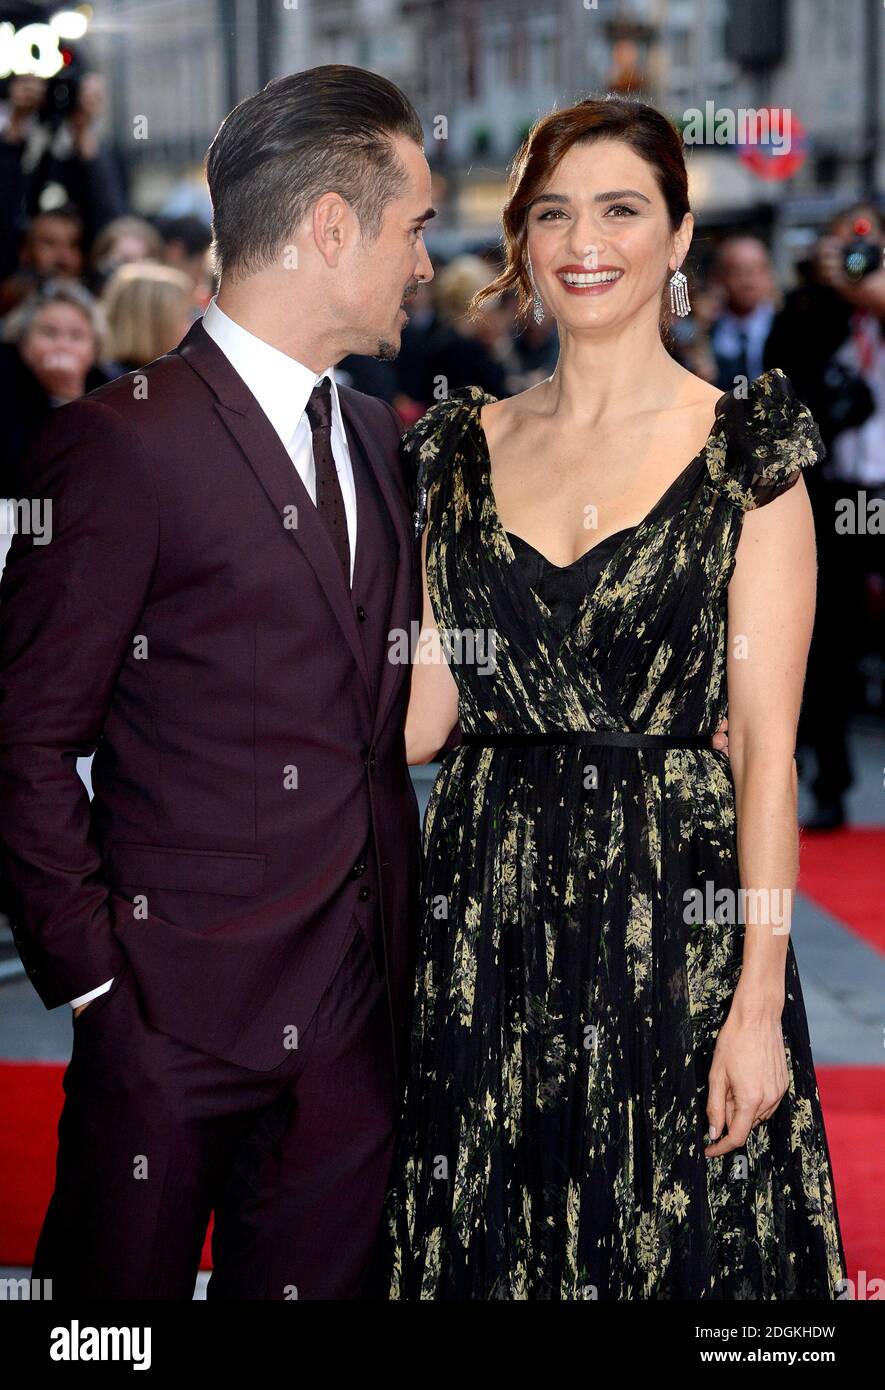 Colin Farrell and Rachel Weisz attending the BFI London Film Festival official screening for The Lobster, held at the Vue Cinema, Leicester Square, London. Photo Credit should read Doug Peters/EMPICS Entertainment Stock Photo